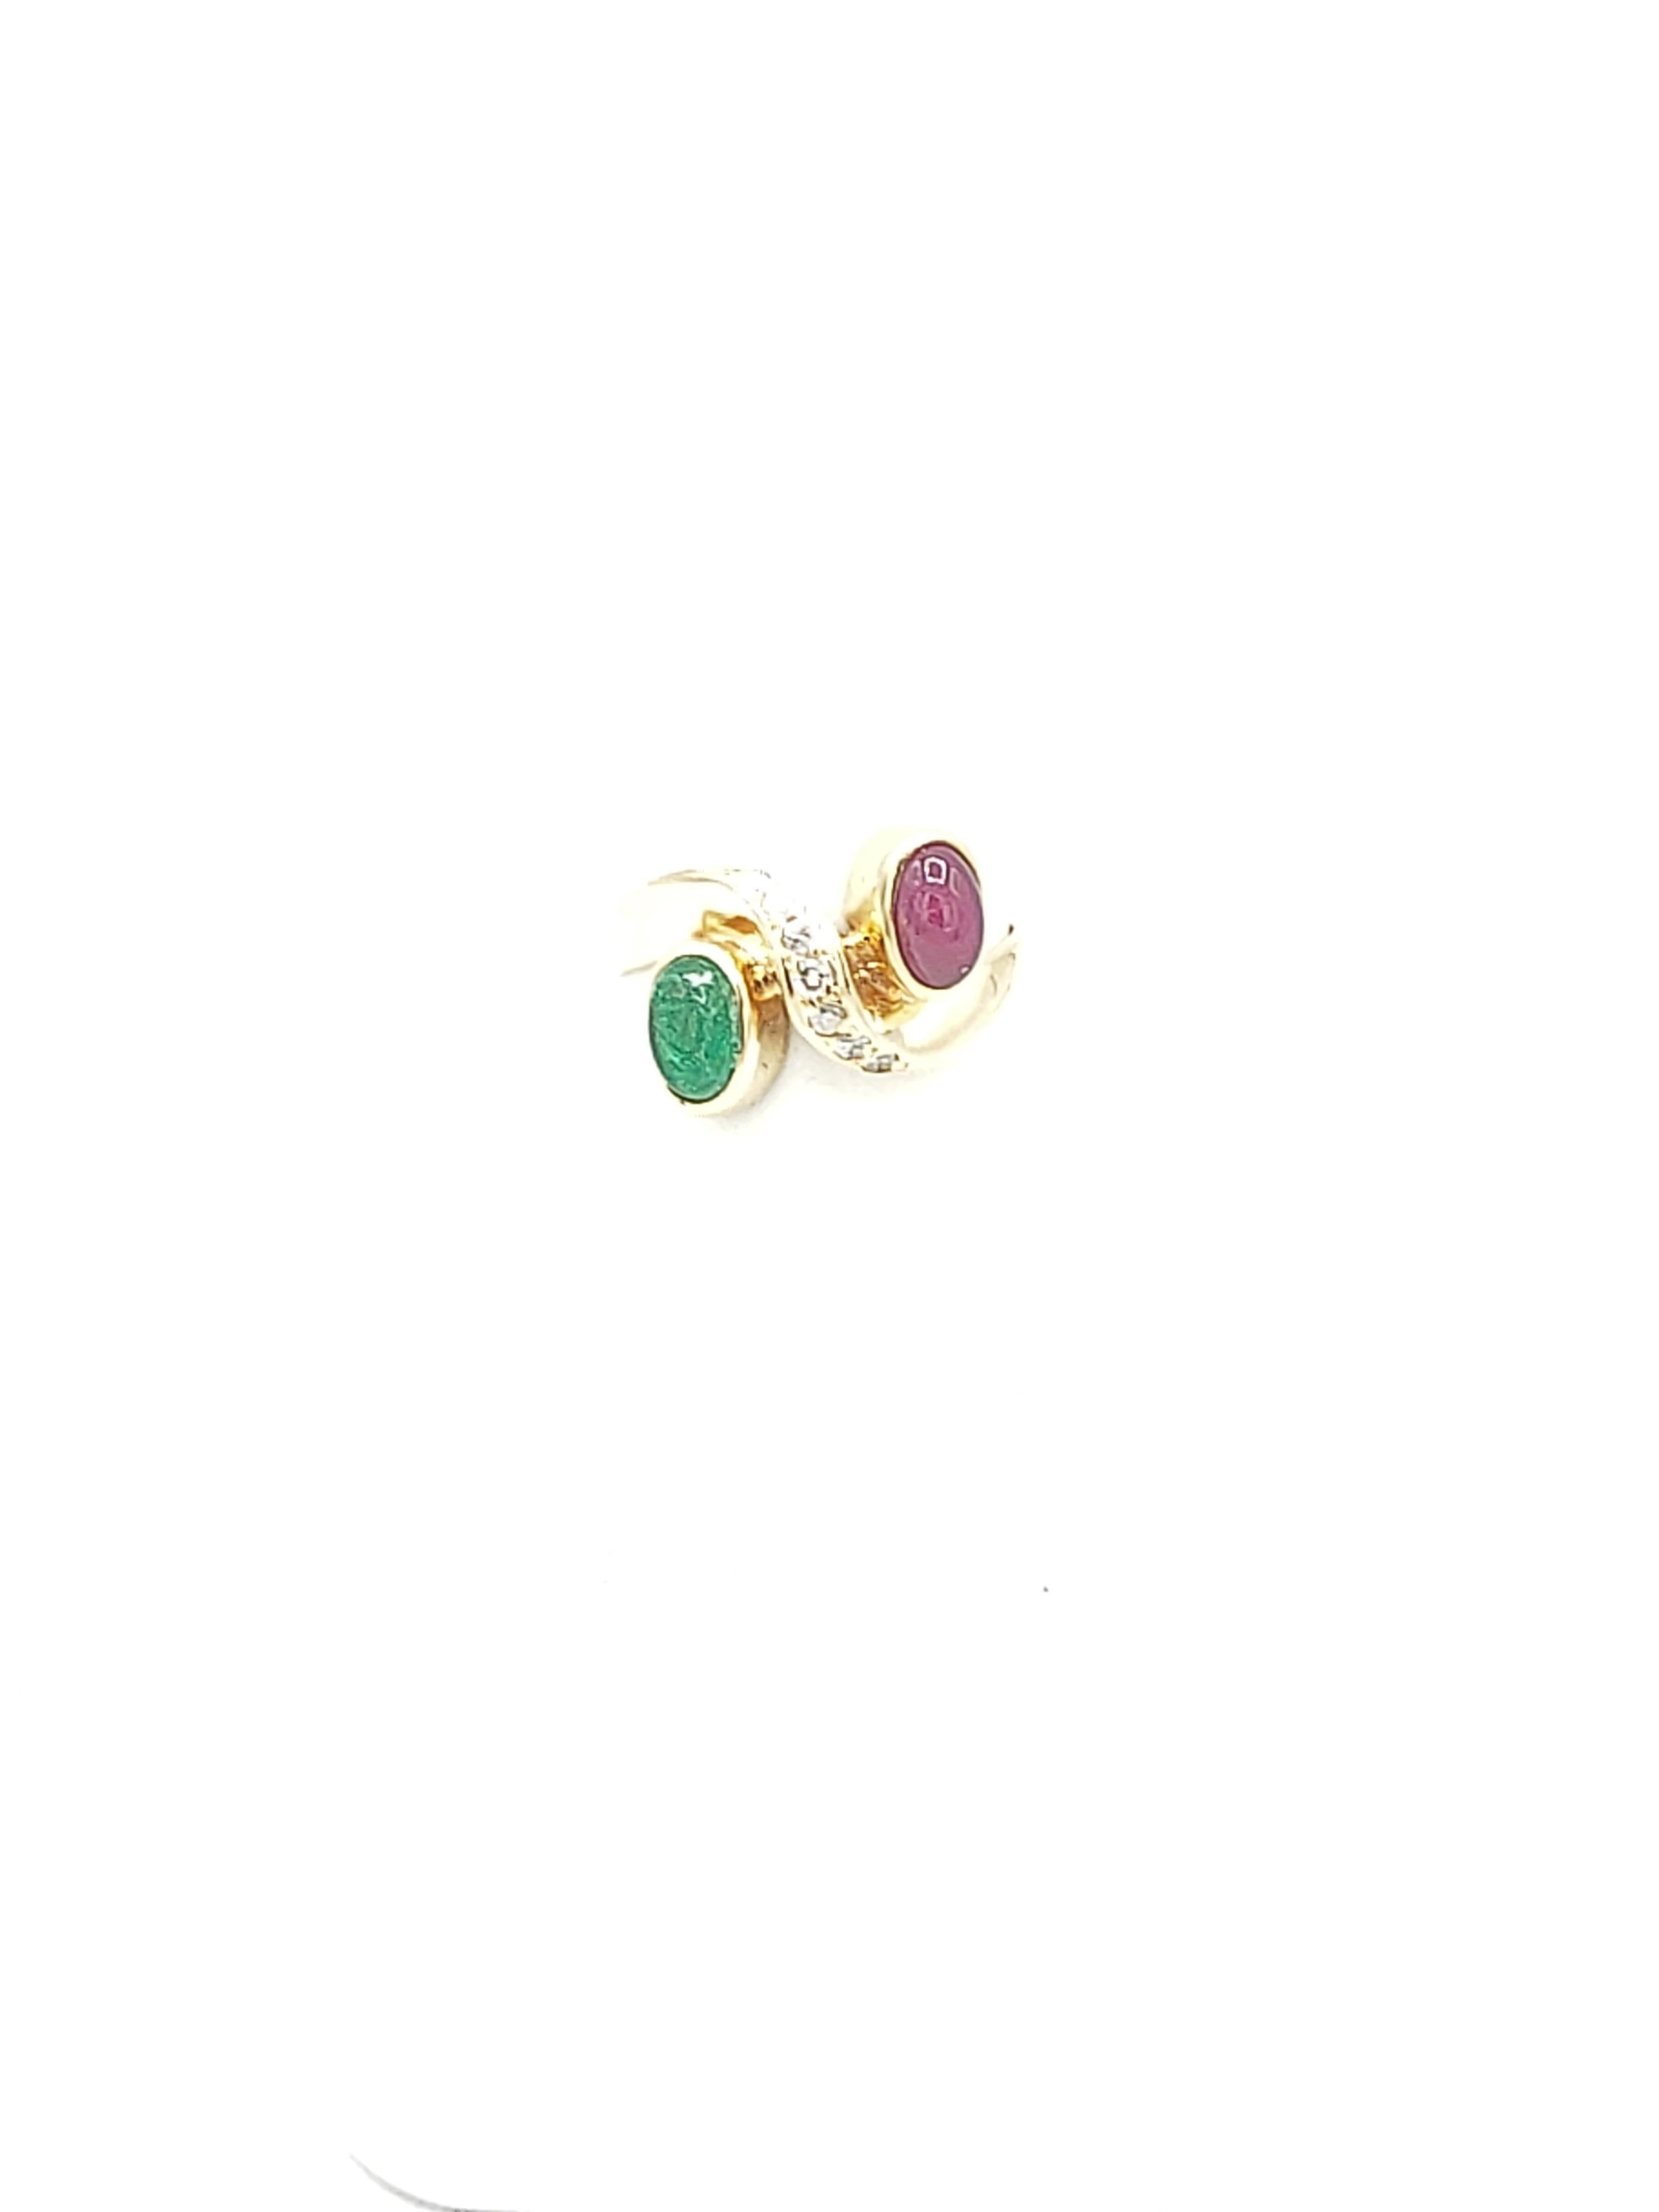 Oval Cut NEW Natural Precious Ruby and Emerald Diamond Ring in 14k Yellow Gold New For Sale